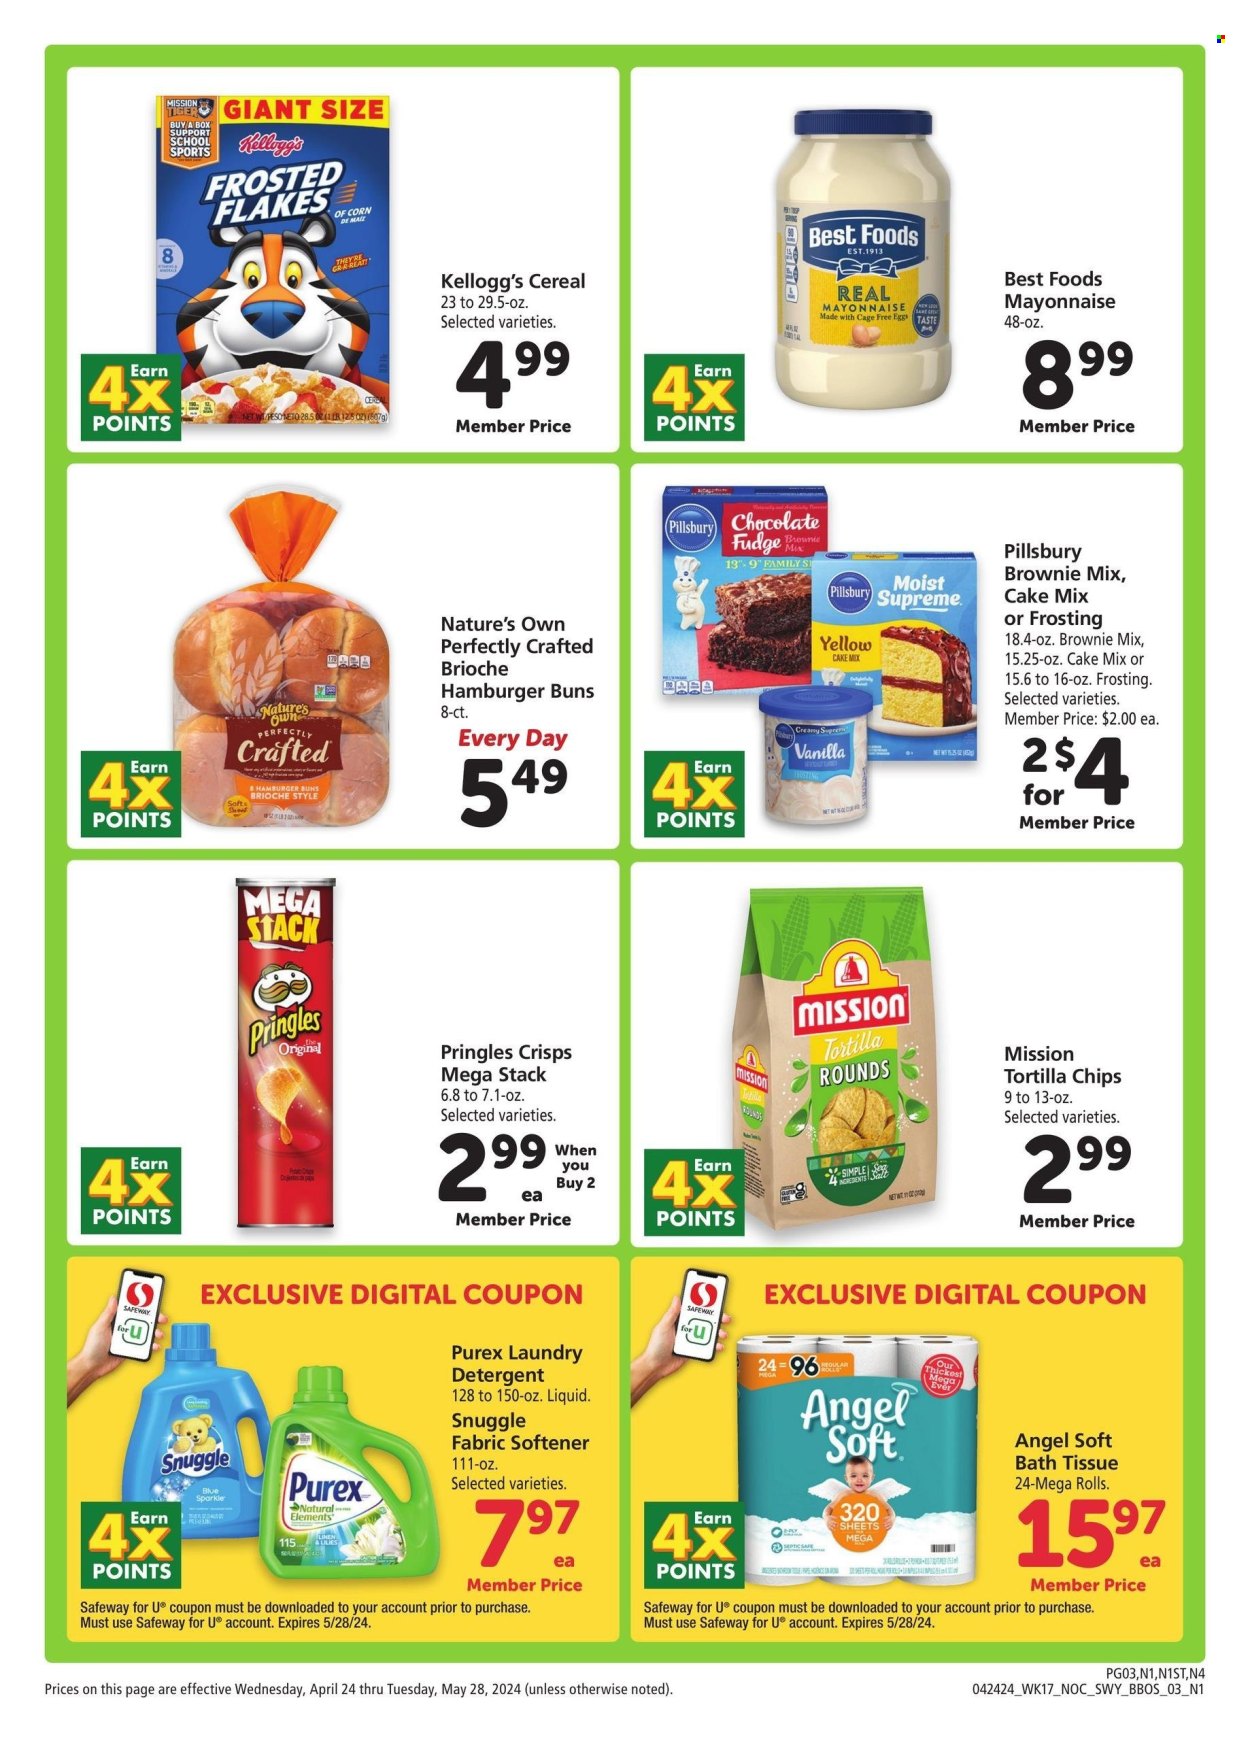 thumbnail - Vons Flyer - 04/24/2024 - 05/28/2024 - Sales products - buns, burger buns, brioche, brownie mix, cake mix, Pillsbury, cage free eggs, mayonnaise, Kellogg's, tortilla chips, Pringles, salty snack, crisps, frosting, baking mix, cereals, Frosted Flakes, bath tissue, detergent, Snuggle, fabric softener, laundry detergent, Purex, Nature's Own, eggs. Page 3.